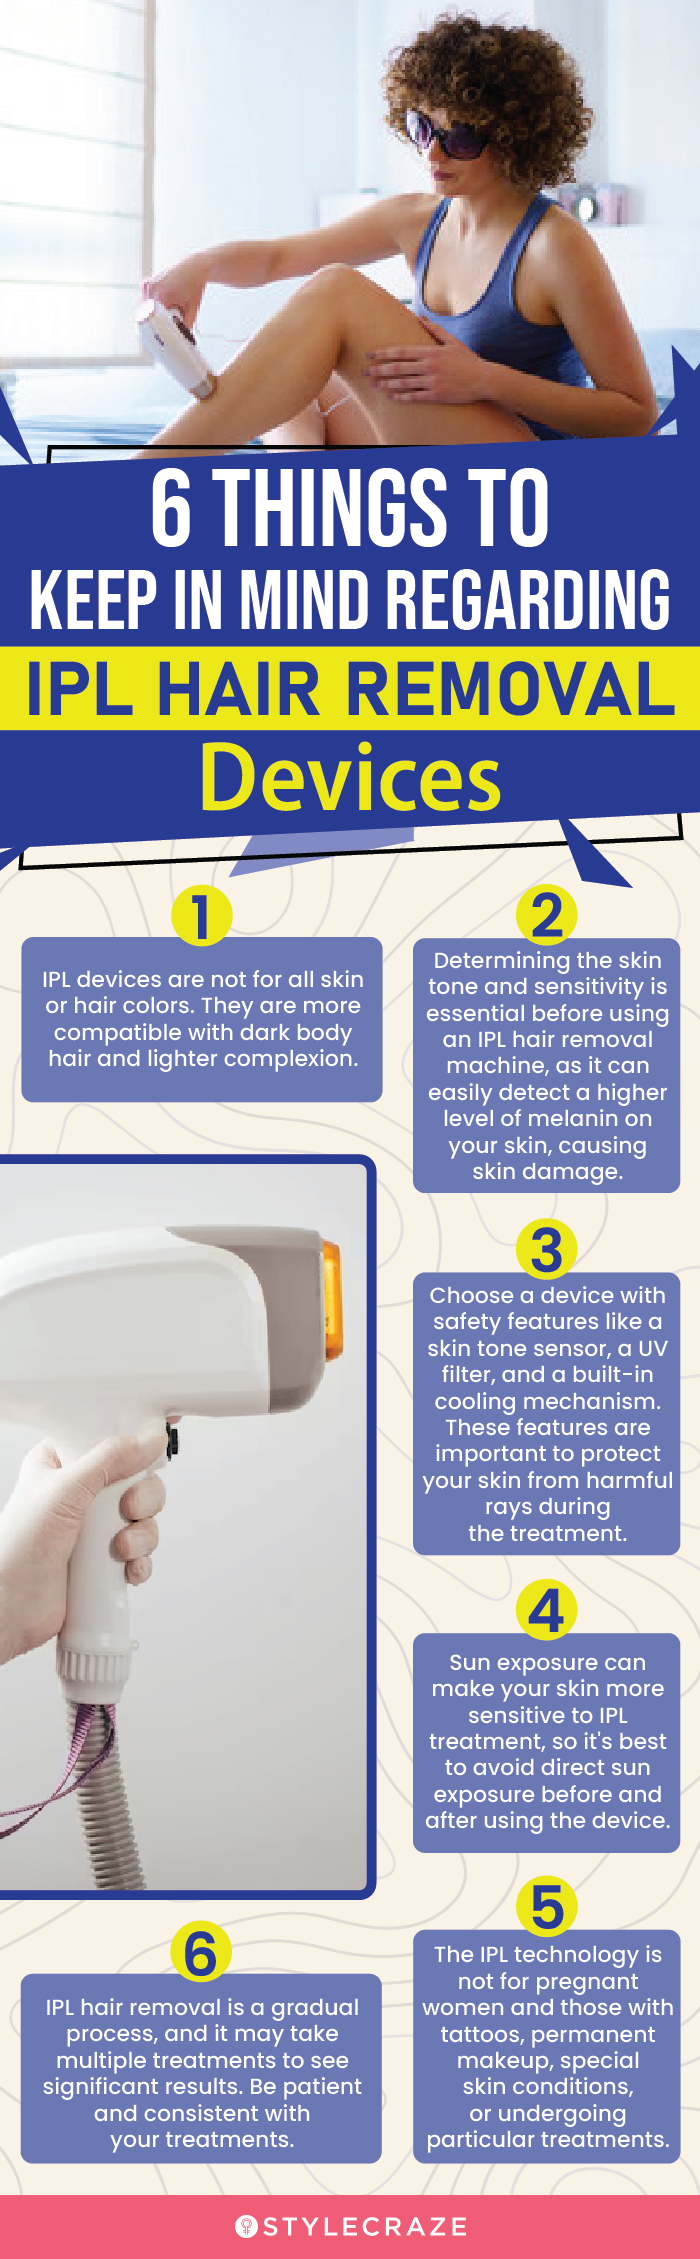 6 Things To Keep In Mind Regarding IPL Hair Removal Devices(infographic)